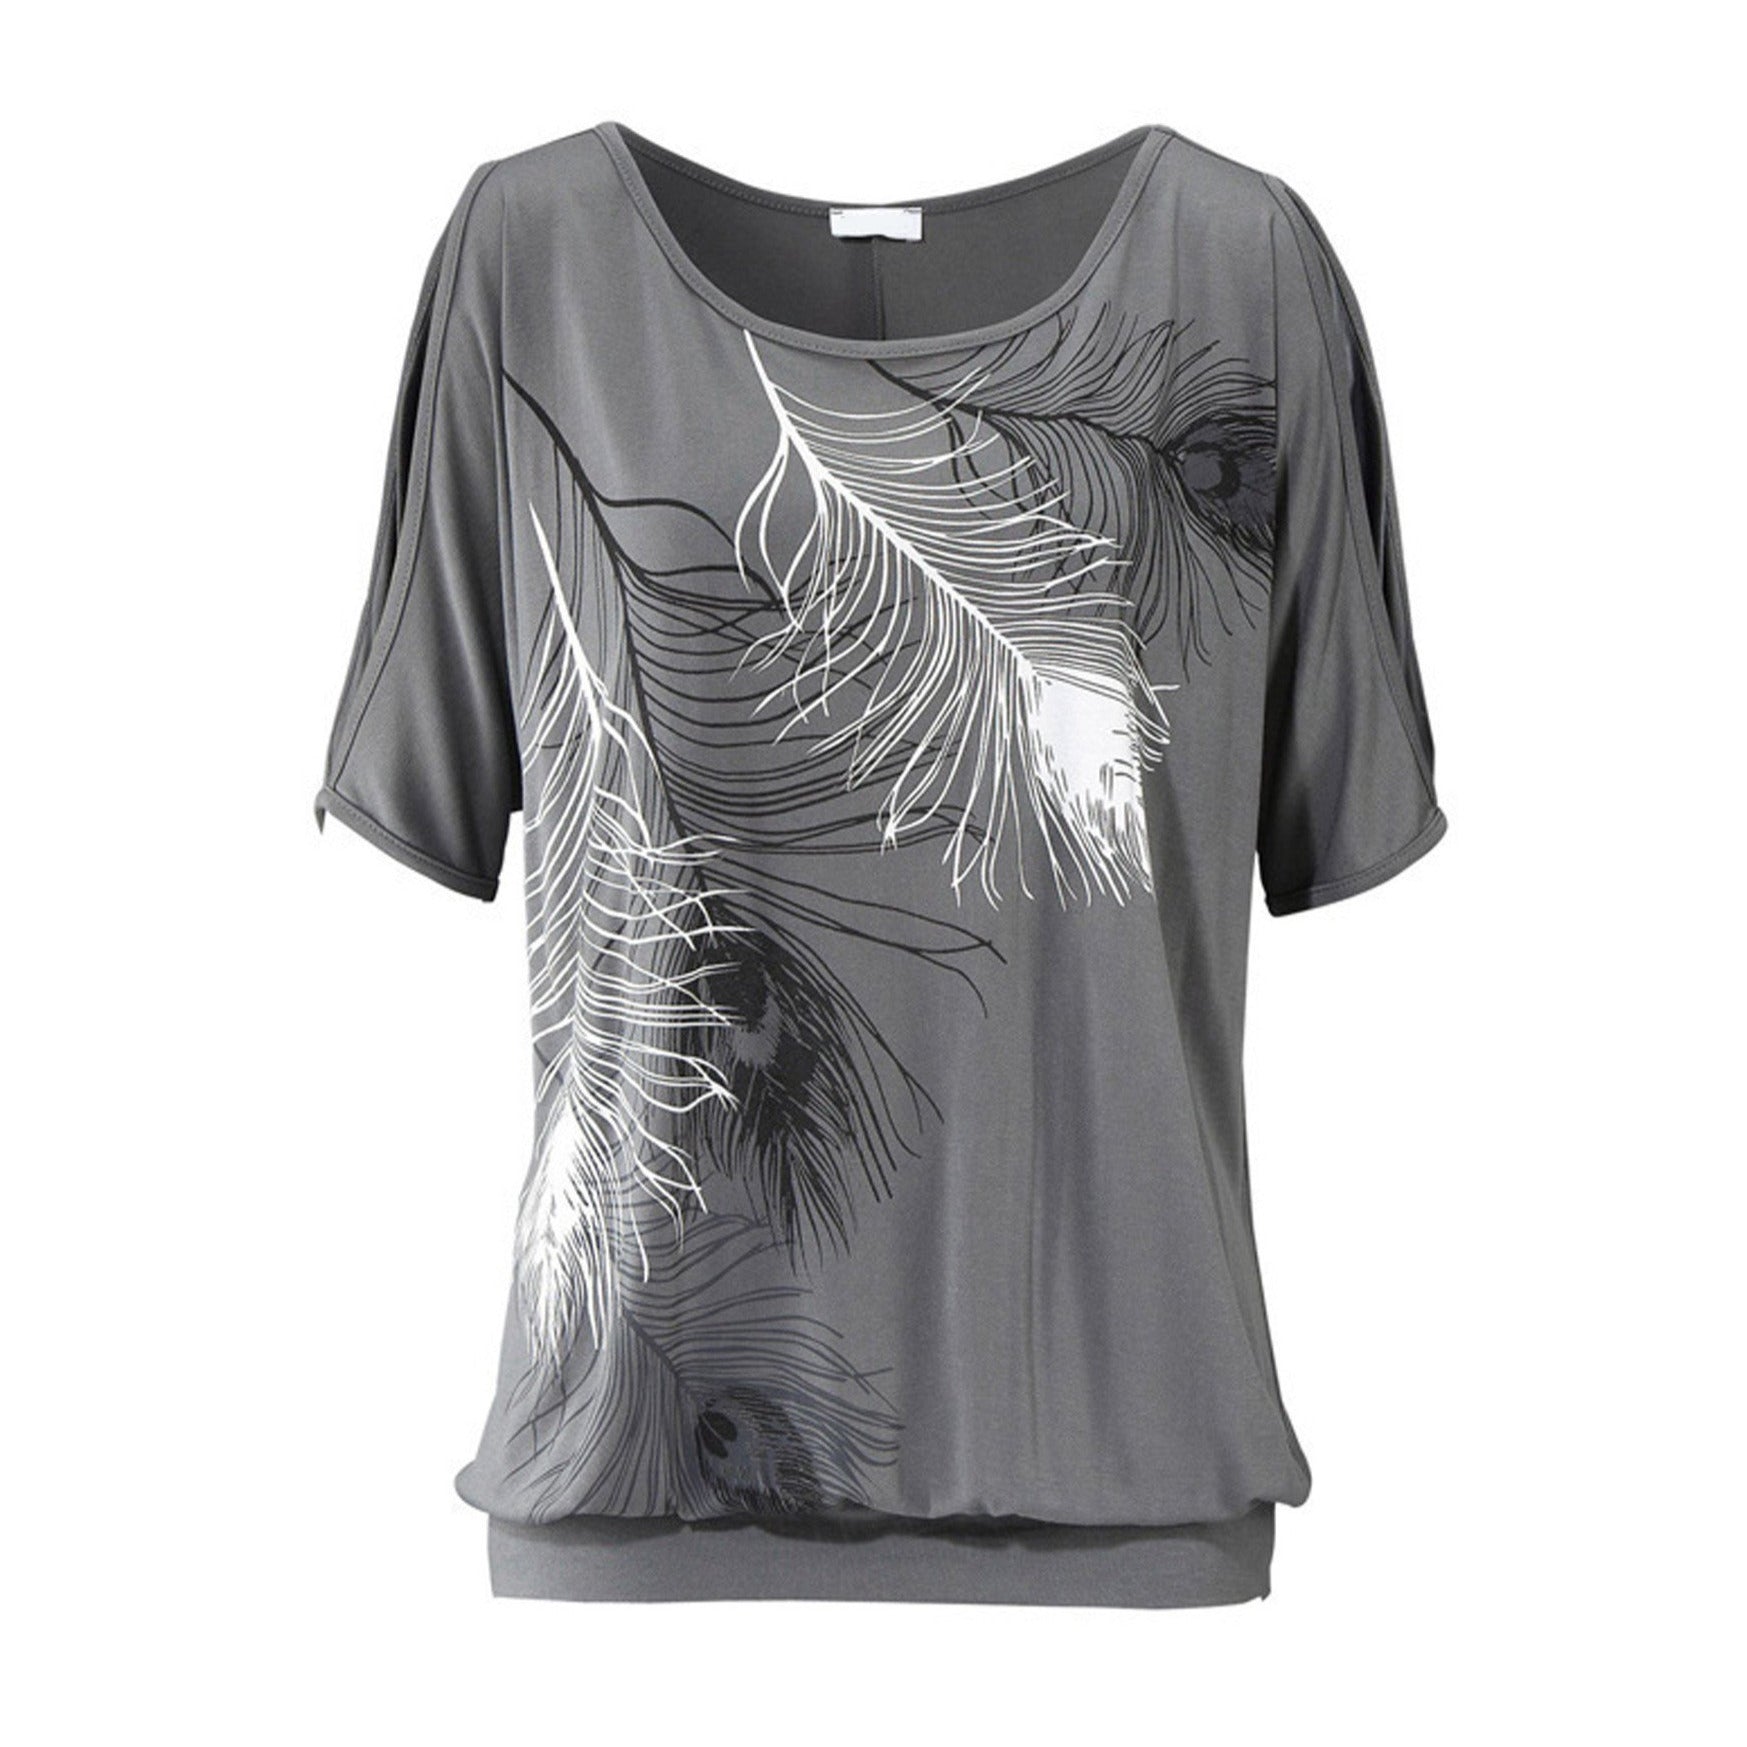 Gray Cut Out Shoulder Top with Feather Prints - AmtifyDirect